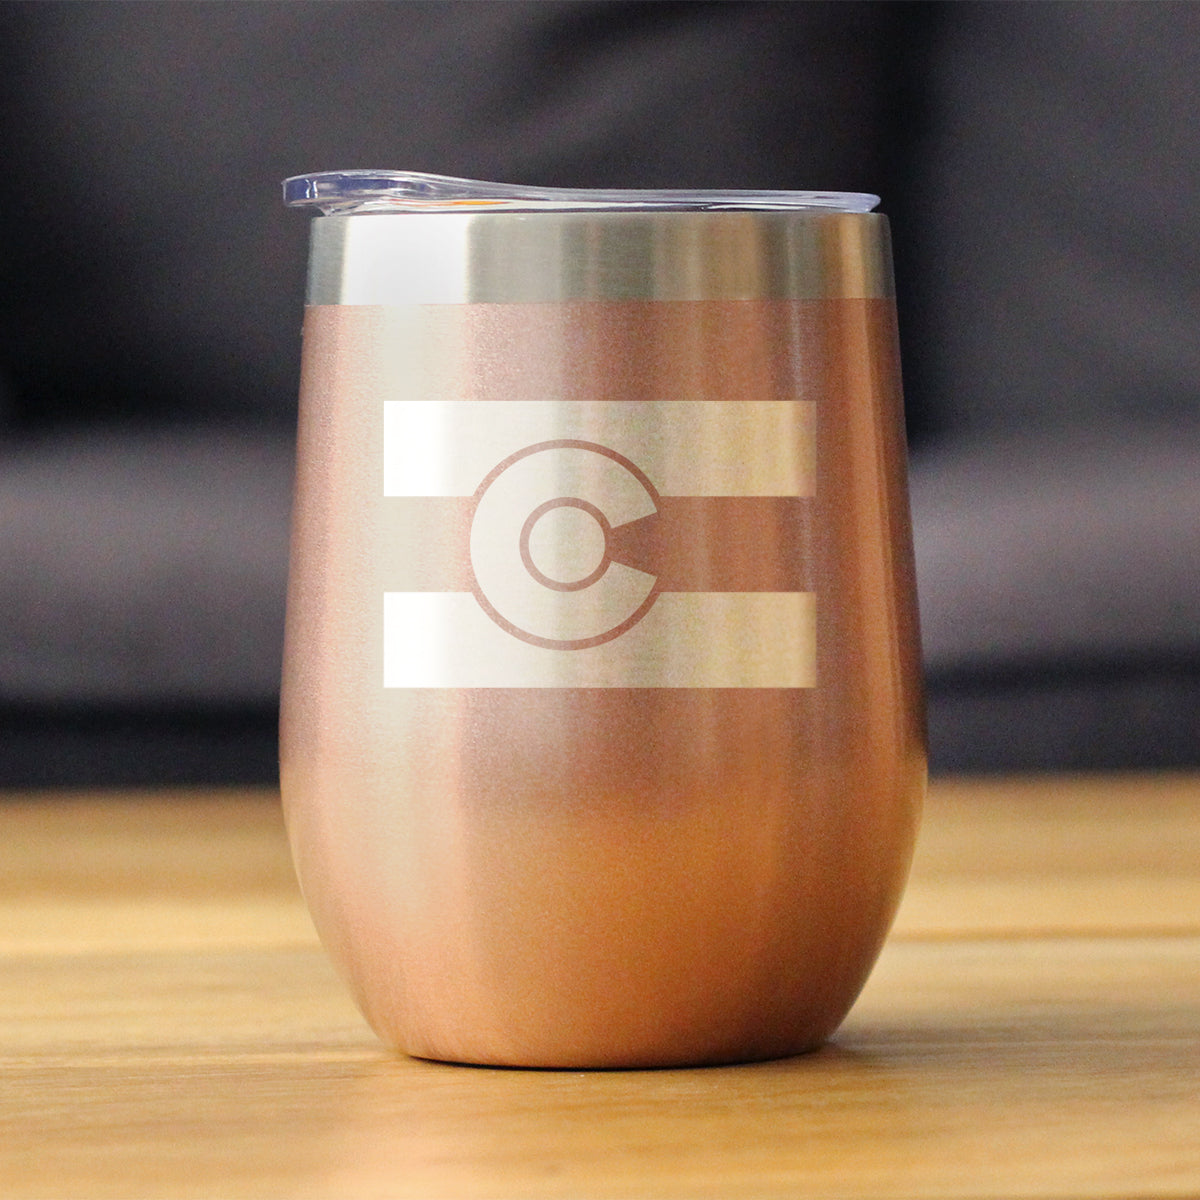 Colorado Flag - Wine Tumbler with Sliding Lid - Stemless Stainless Steel Insulated Cup - Cute Outdoor Camping Mug